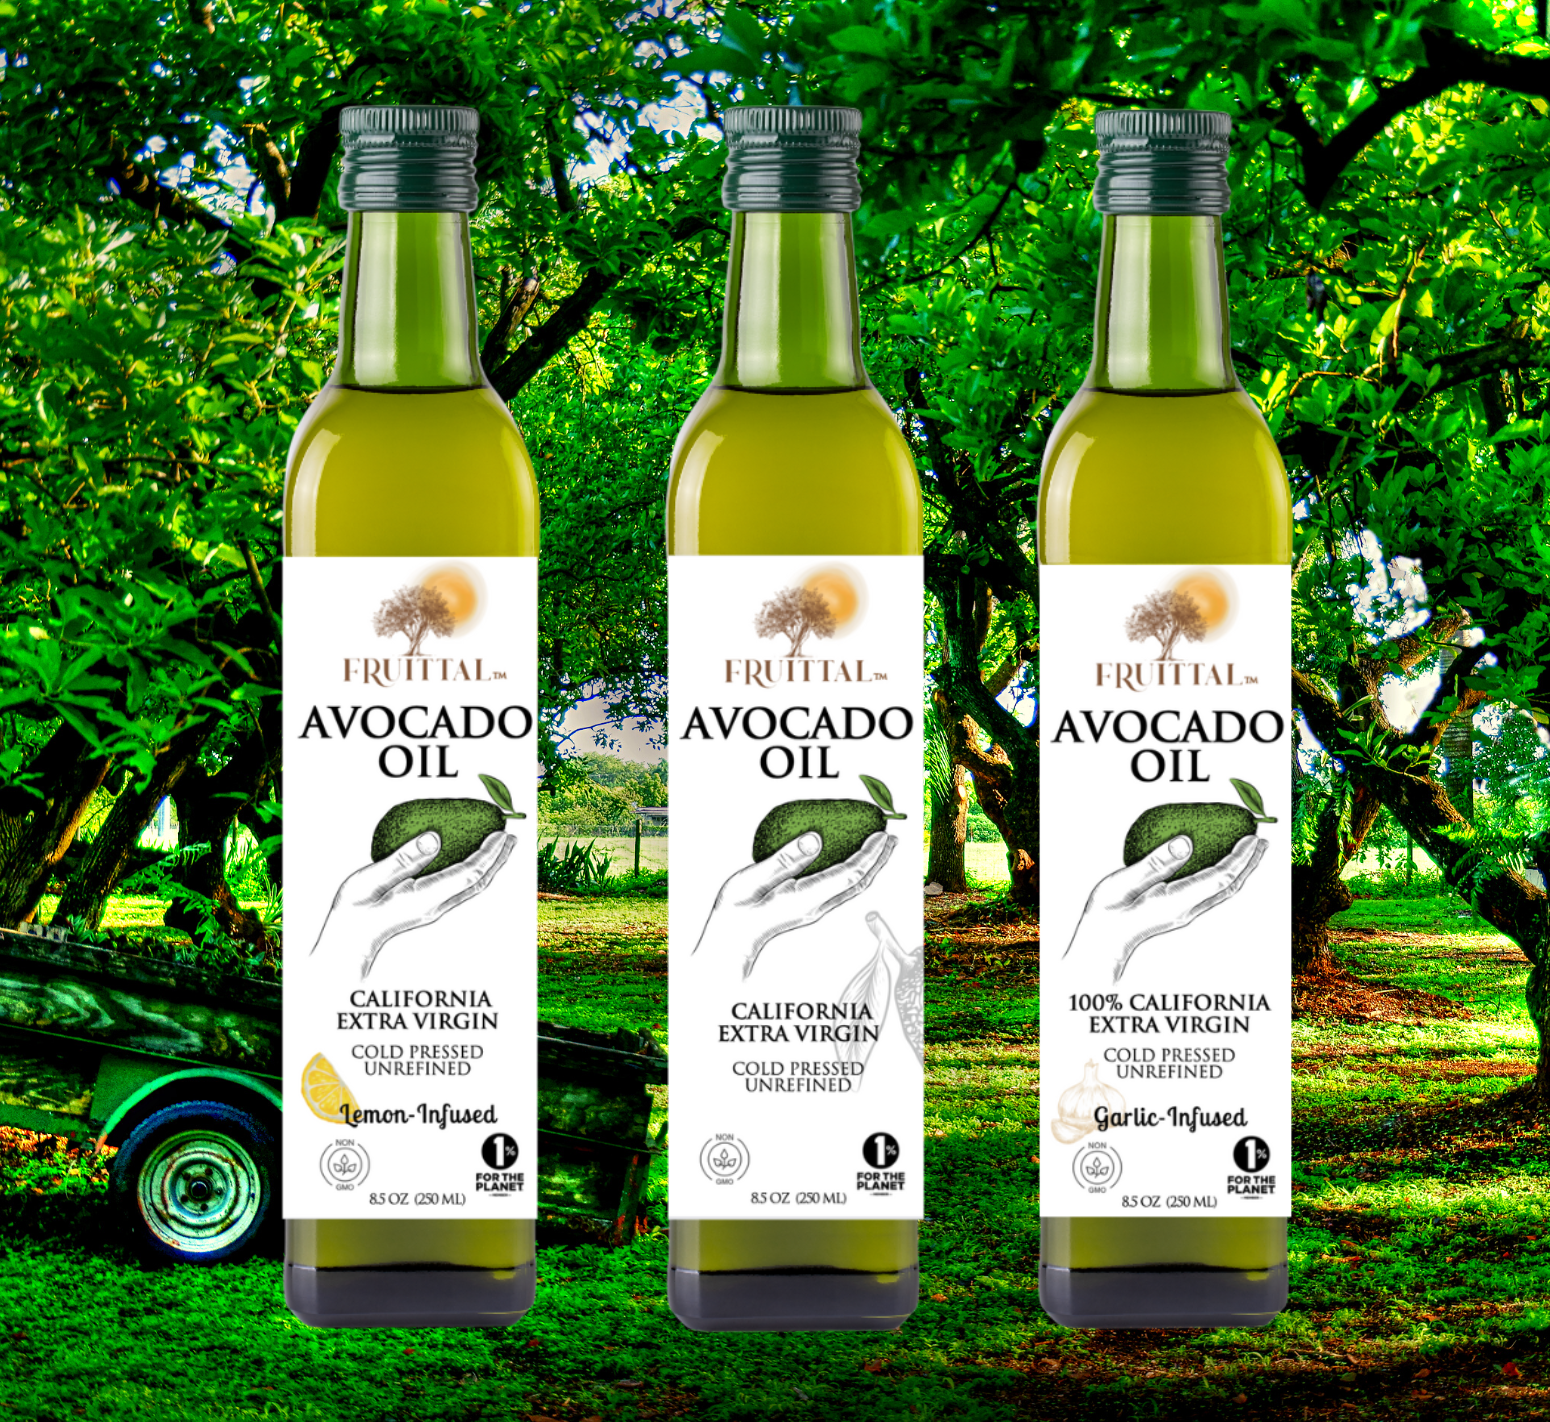 Three bottles of olive oil by Fruittal